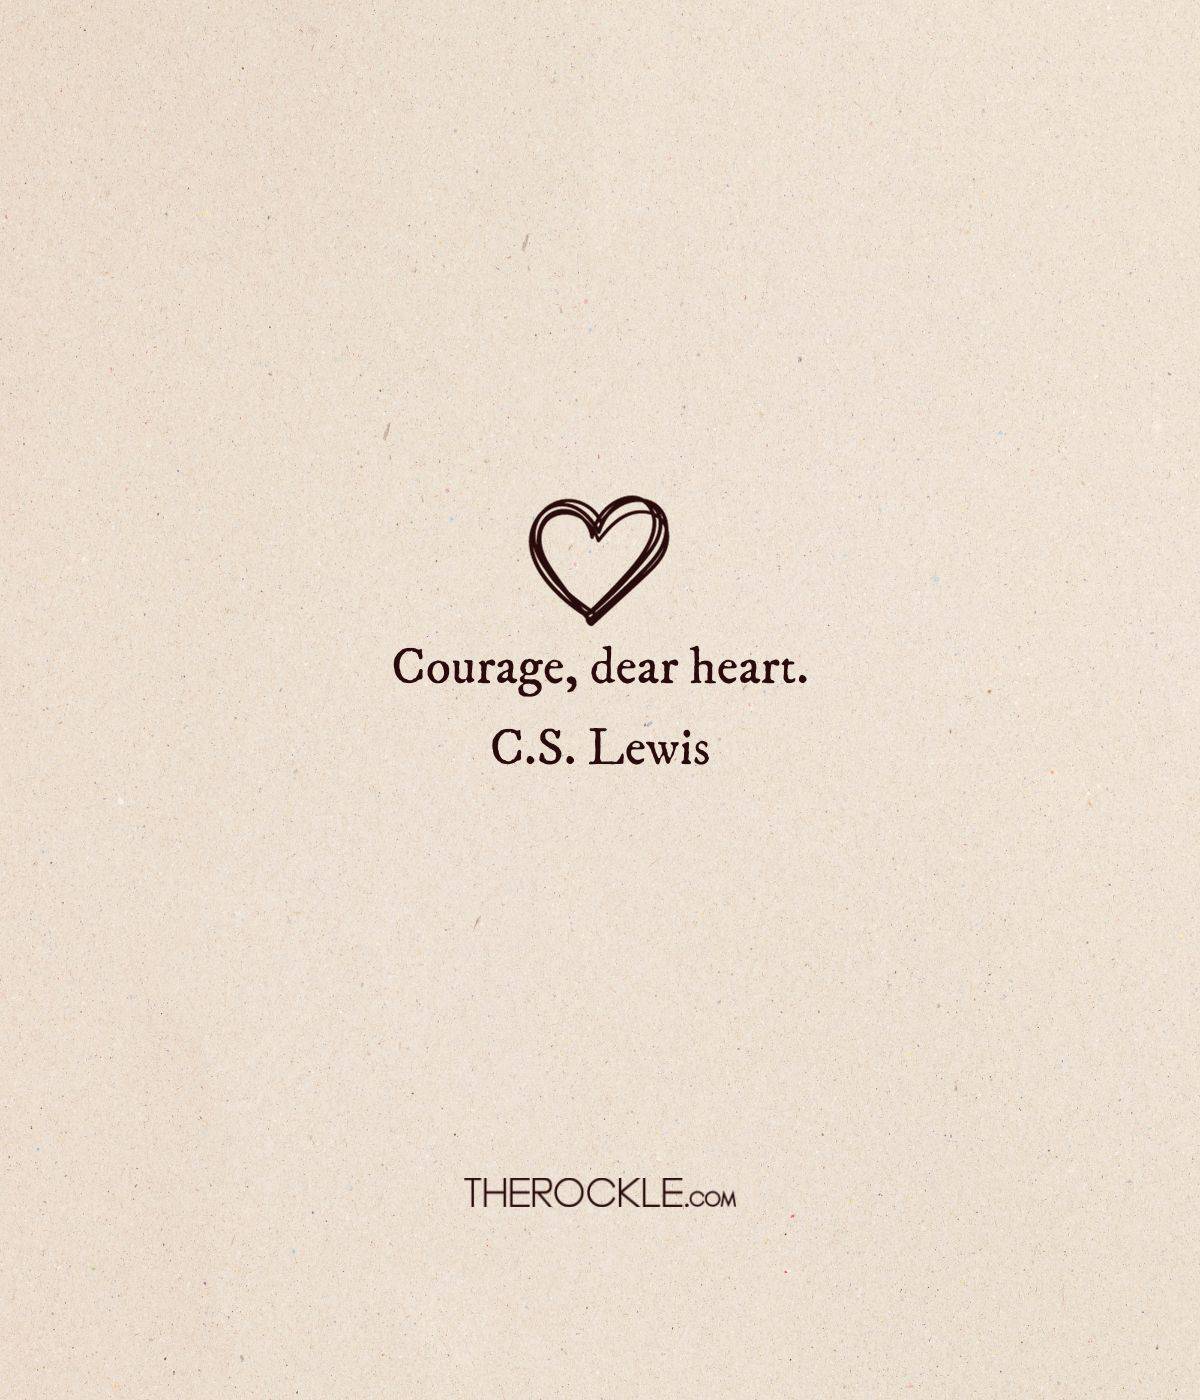 C.S. Lewis quote about courage